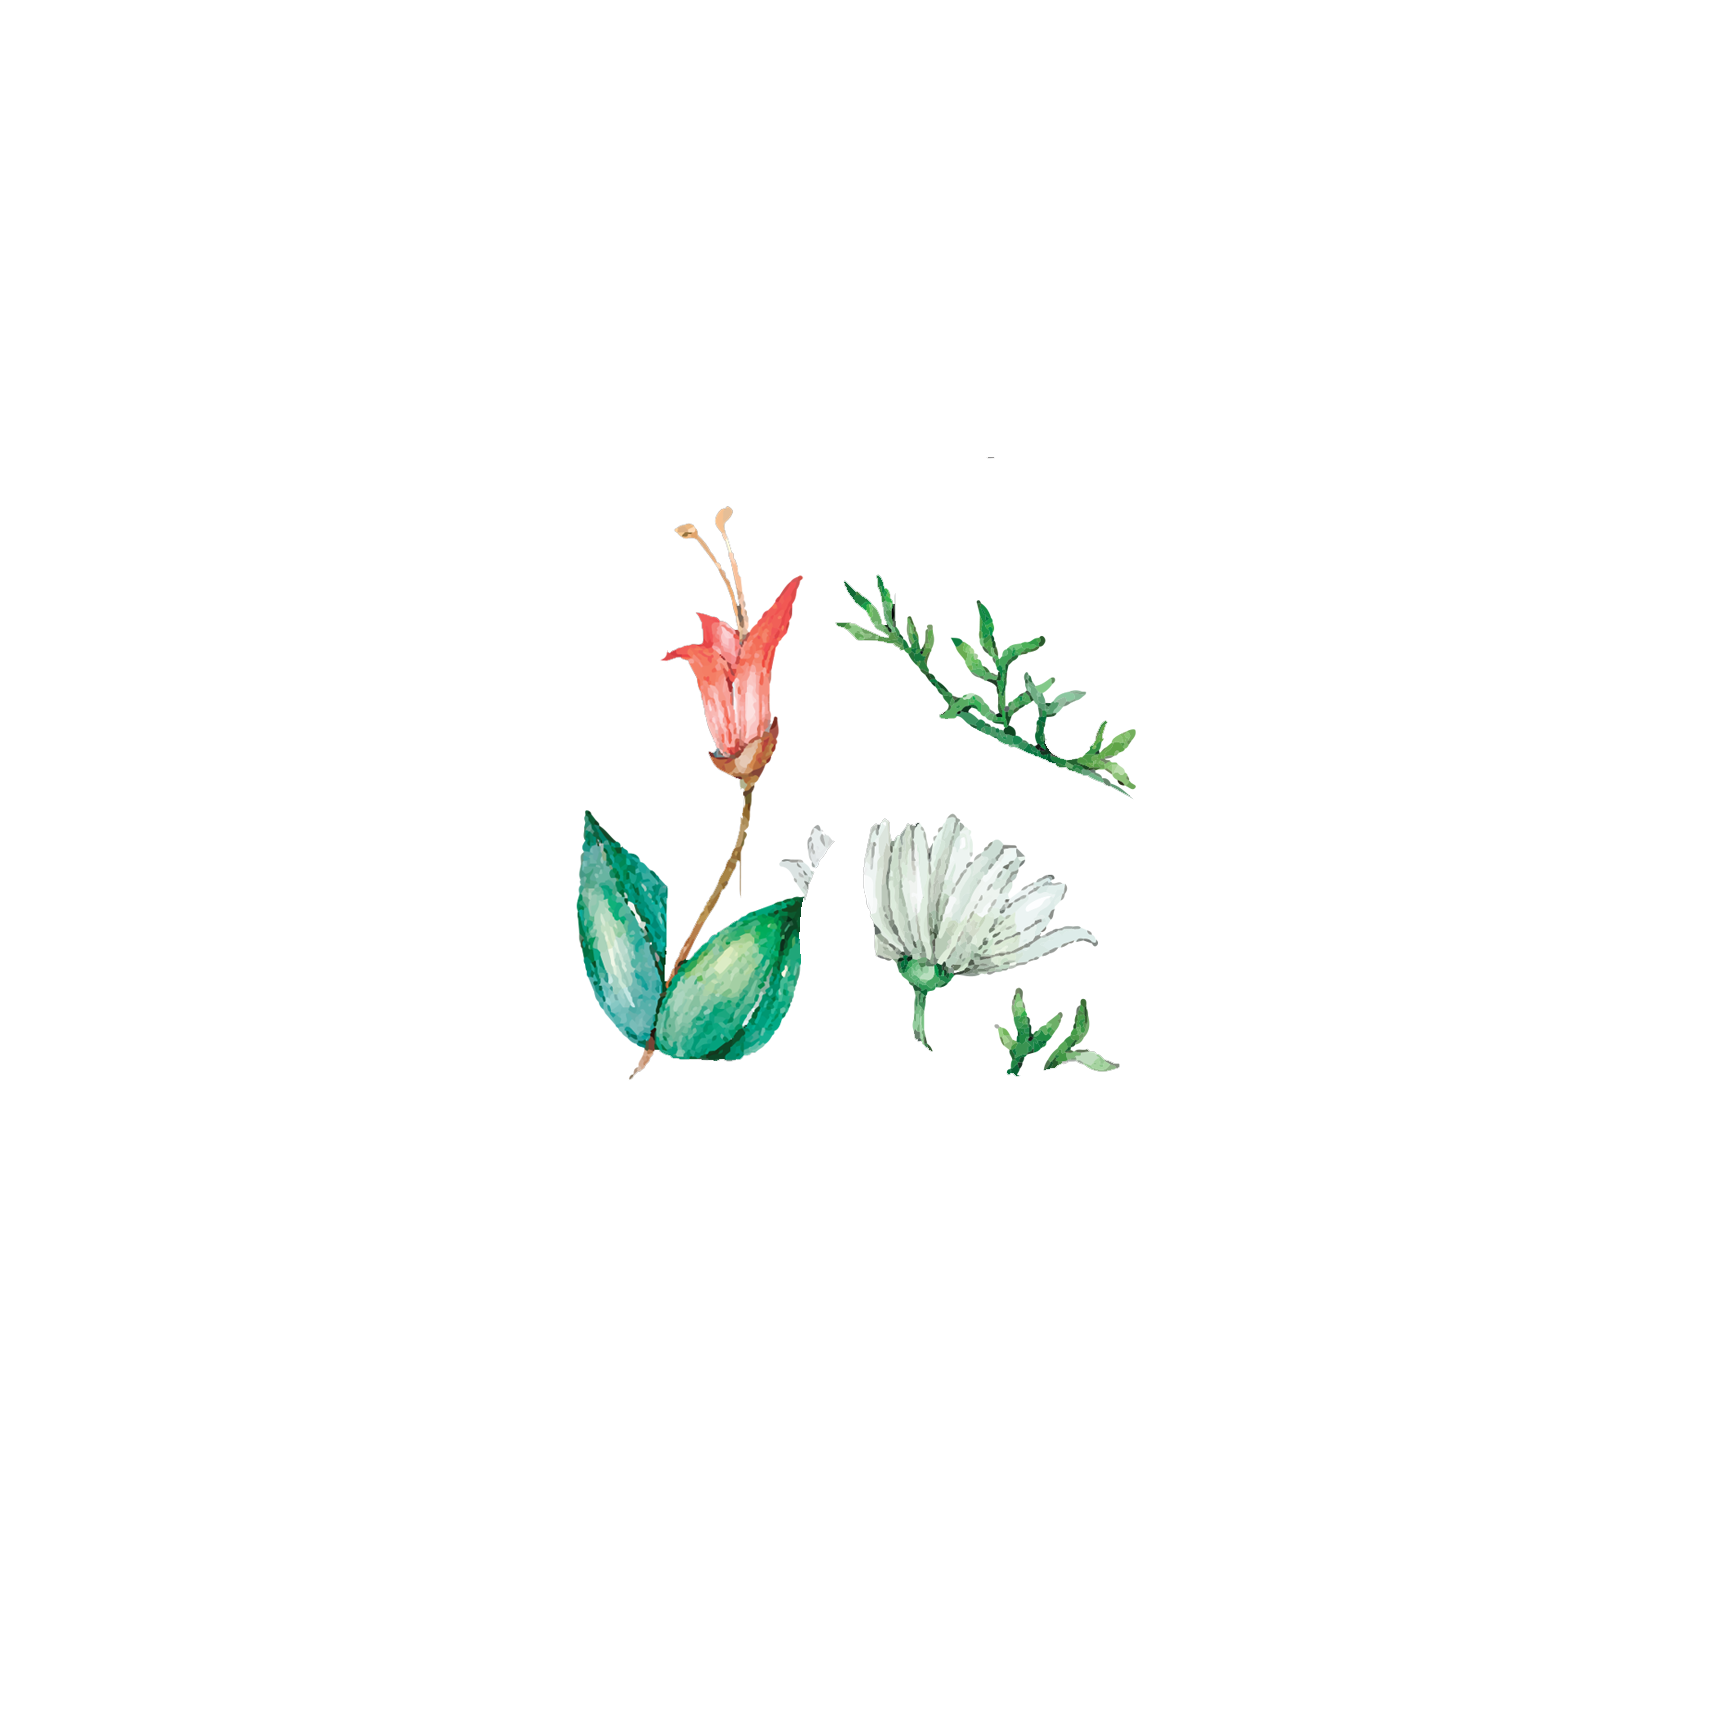 Click to read Day 18 - Body Scan